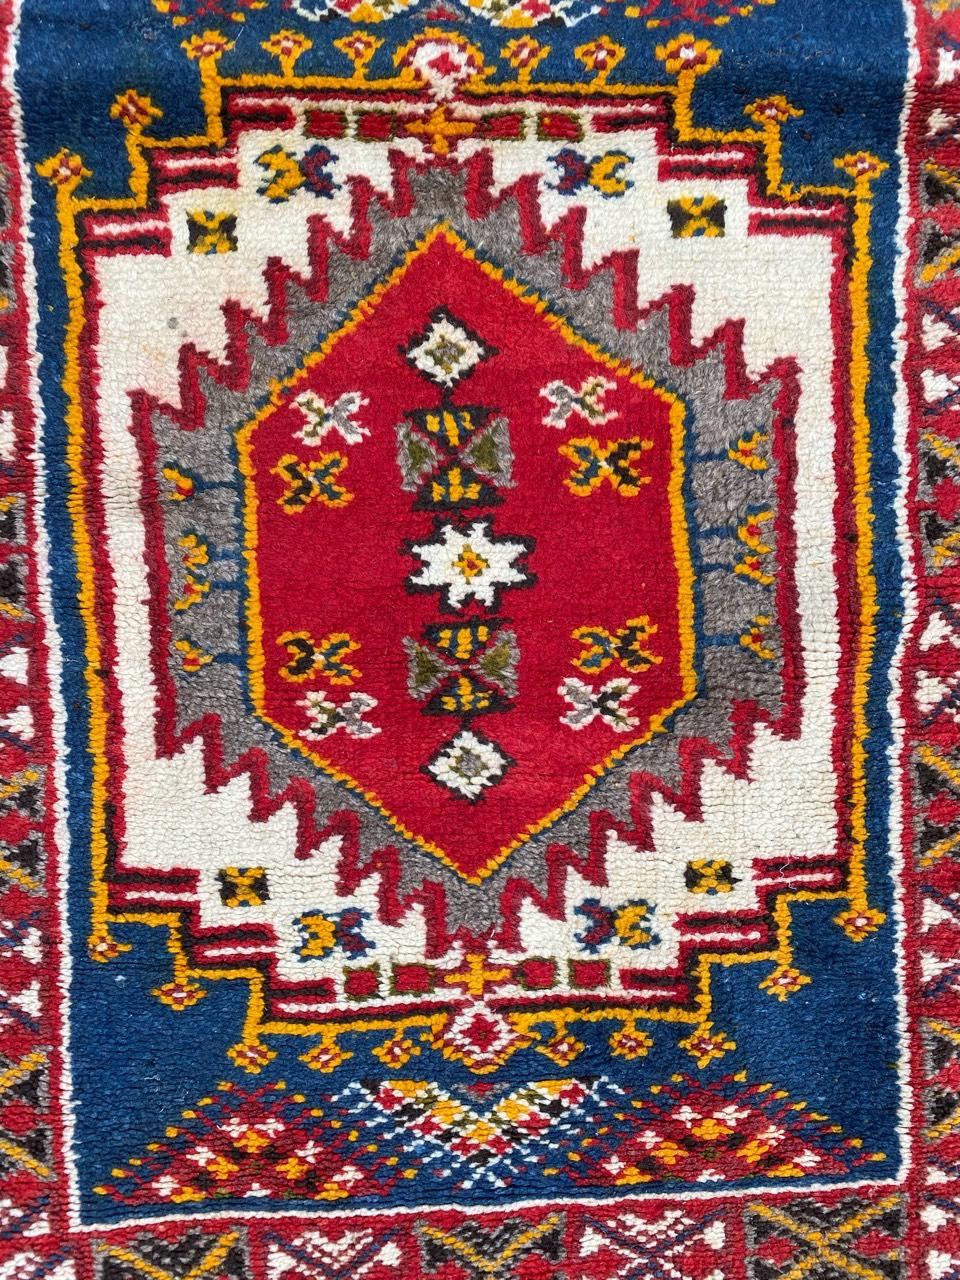 Very beautiful little Moroccan rug with a geometrical design and nice colors with orange, blue, red, yellow, grey and black, entirely hand knotted with wool velvet on wool foundation.